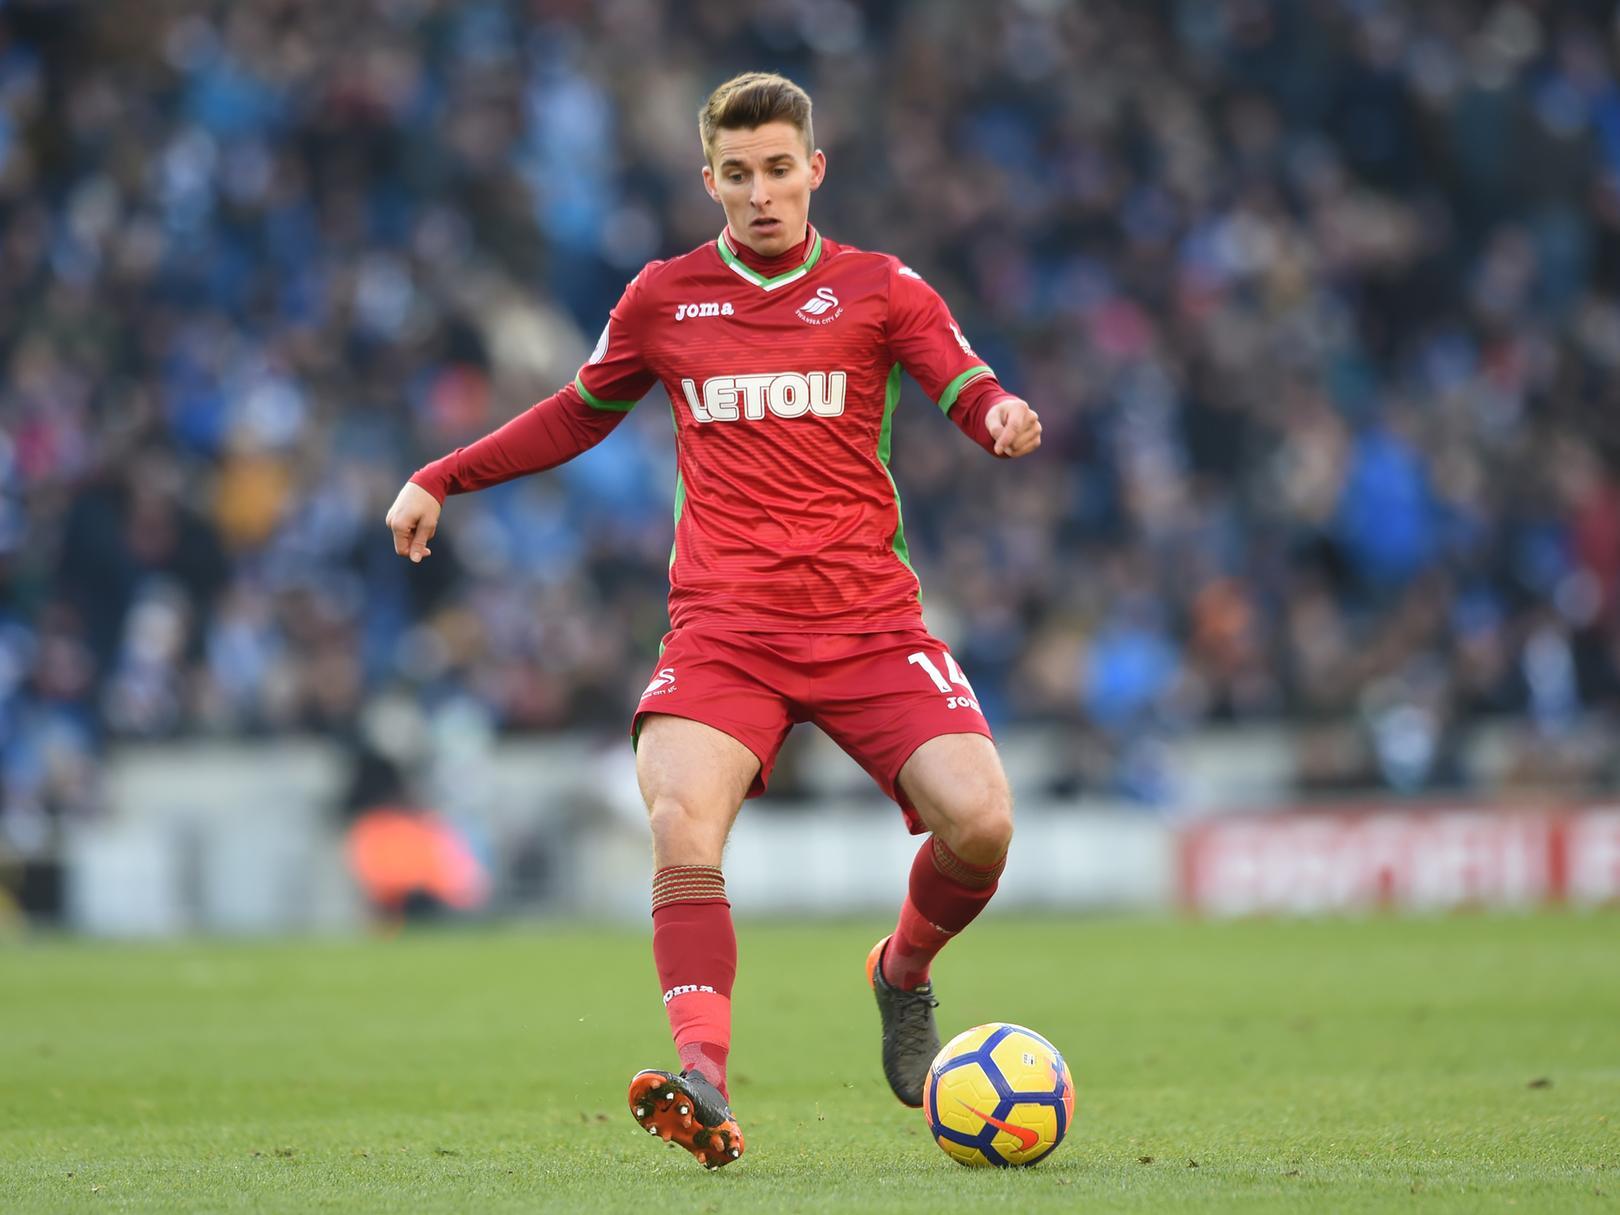 Big things were once expected of the former Tottenham Hotspur midfielder, but he now finds his career at a crucial juncture after being released by Swansea City. A move to League One to rebuild his career could prove attractive.